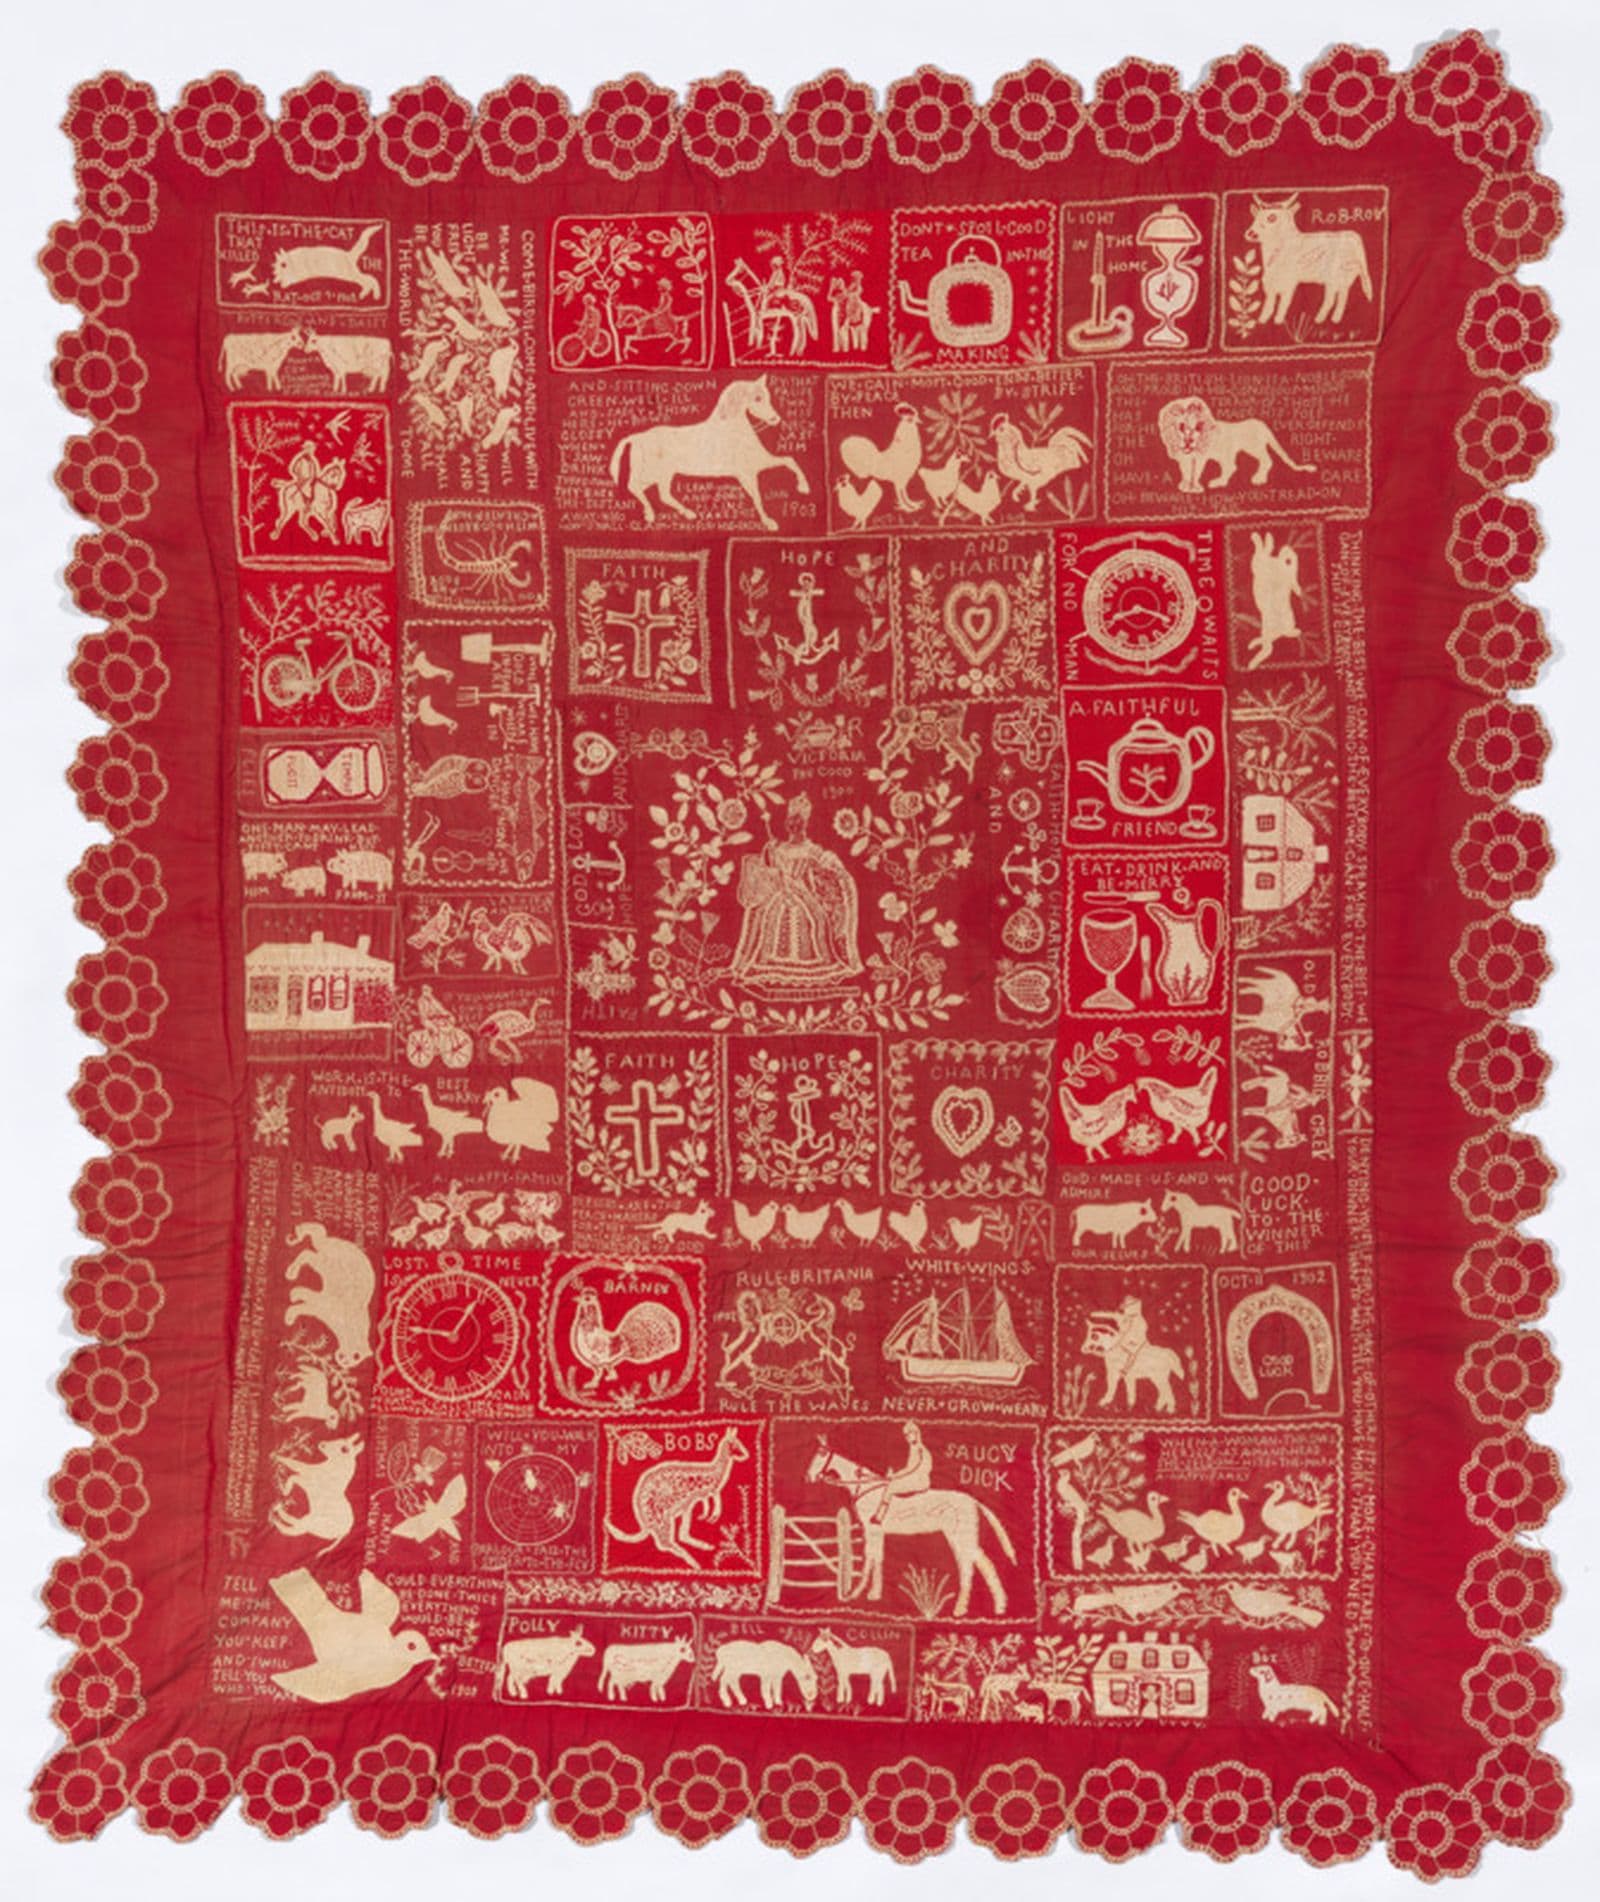 a red hand embroidered quilt with Australian animals and a floral border motif.